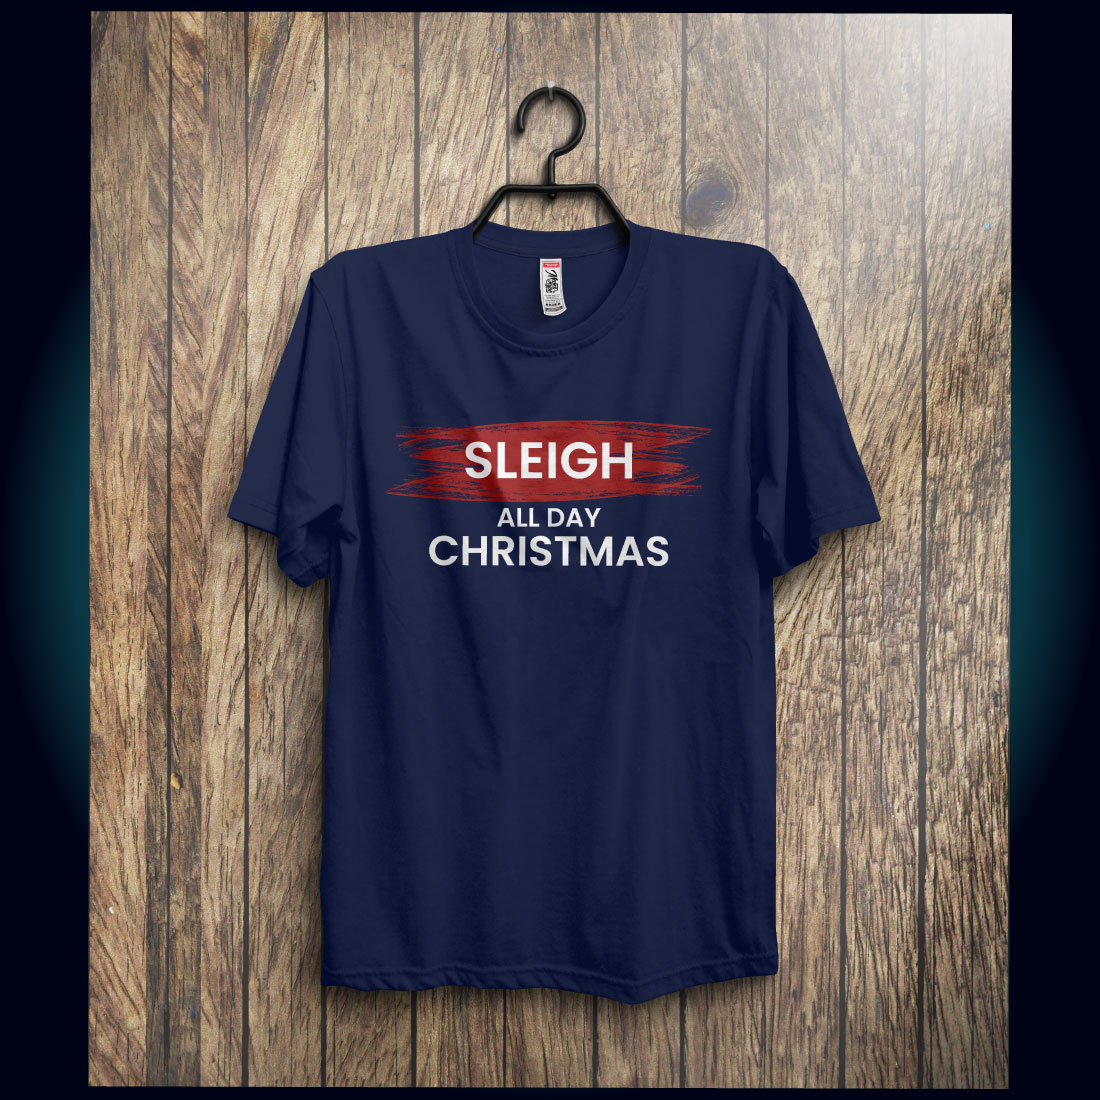 Christmas Day T-shirt Sleigh All Day Design cover image.